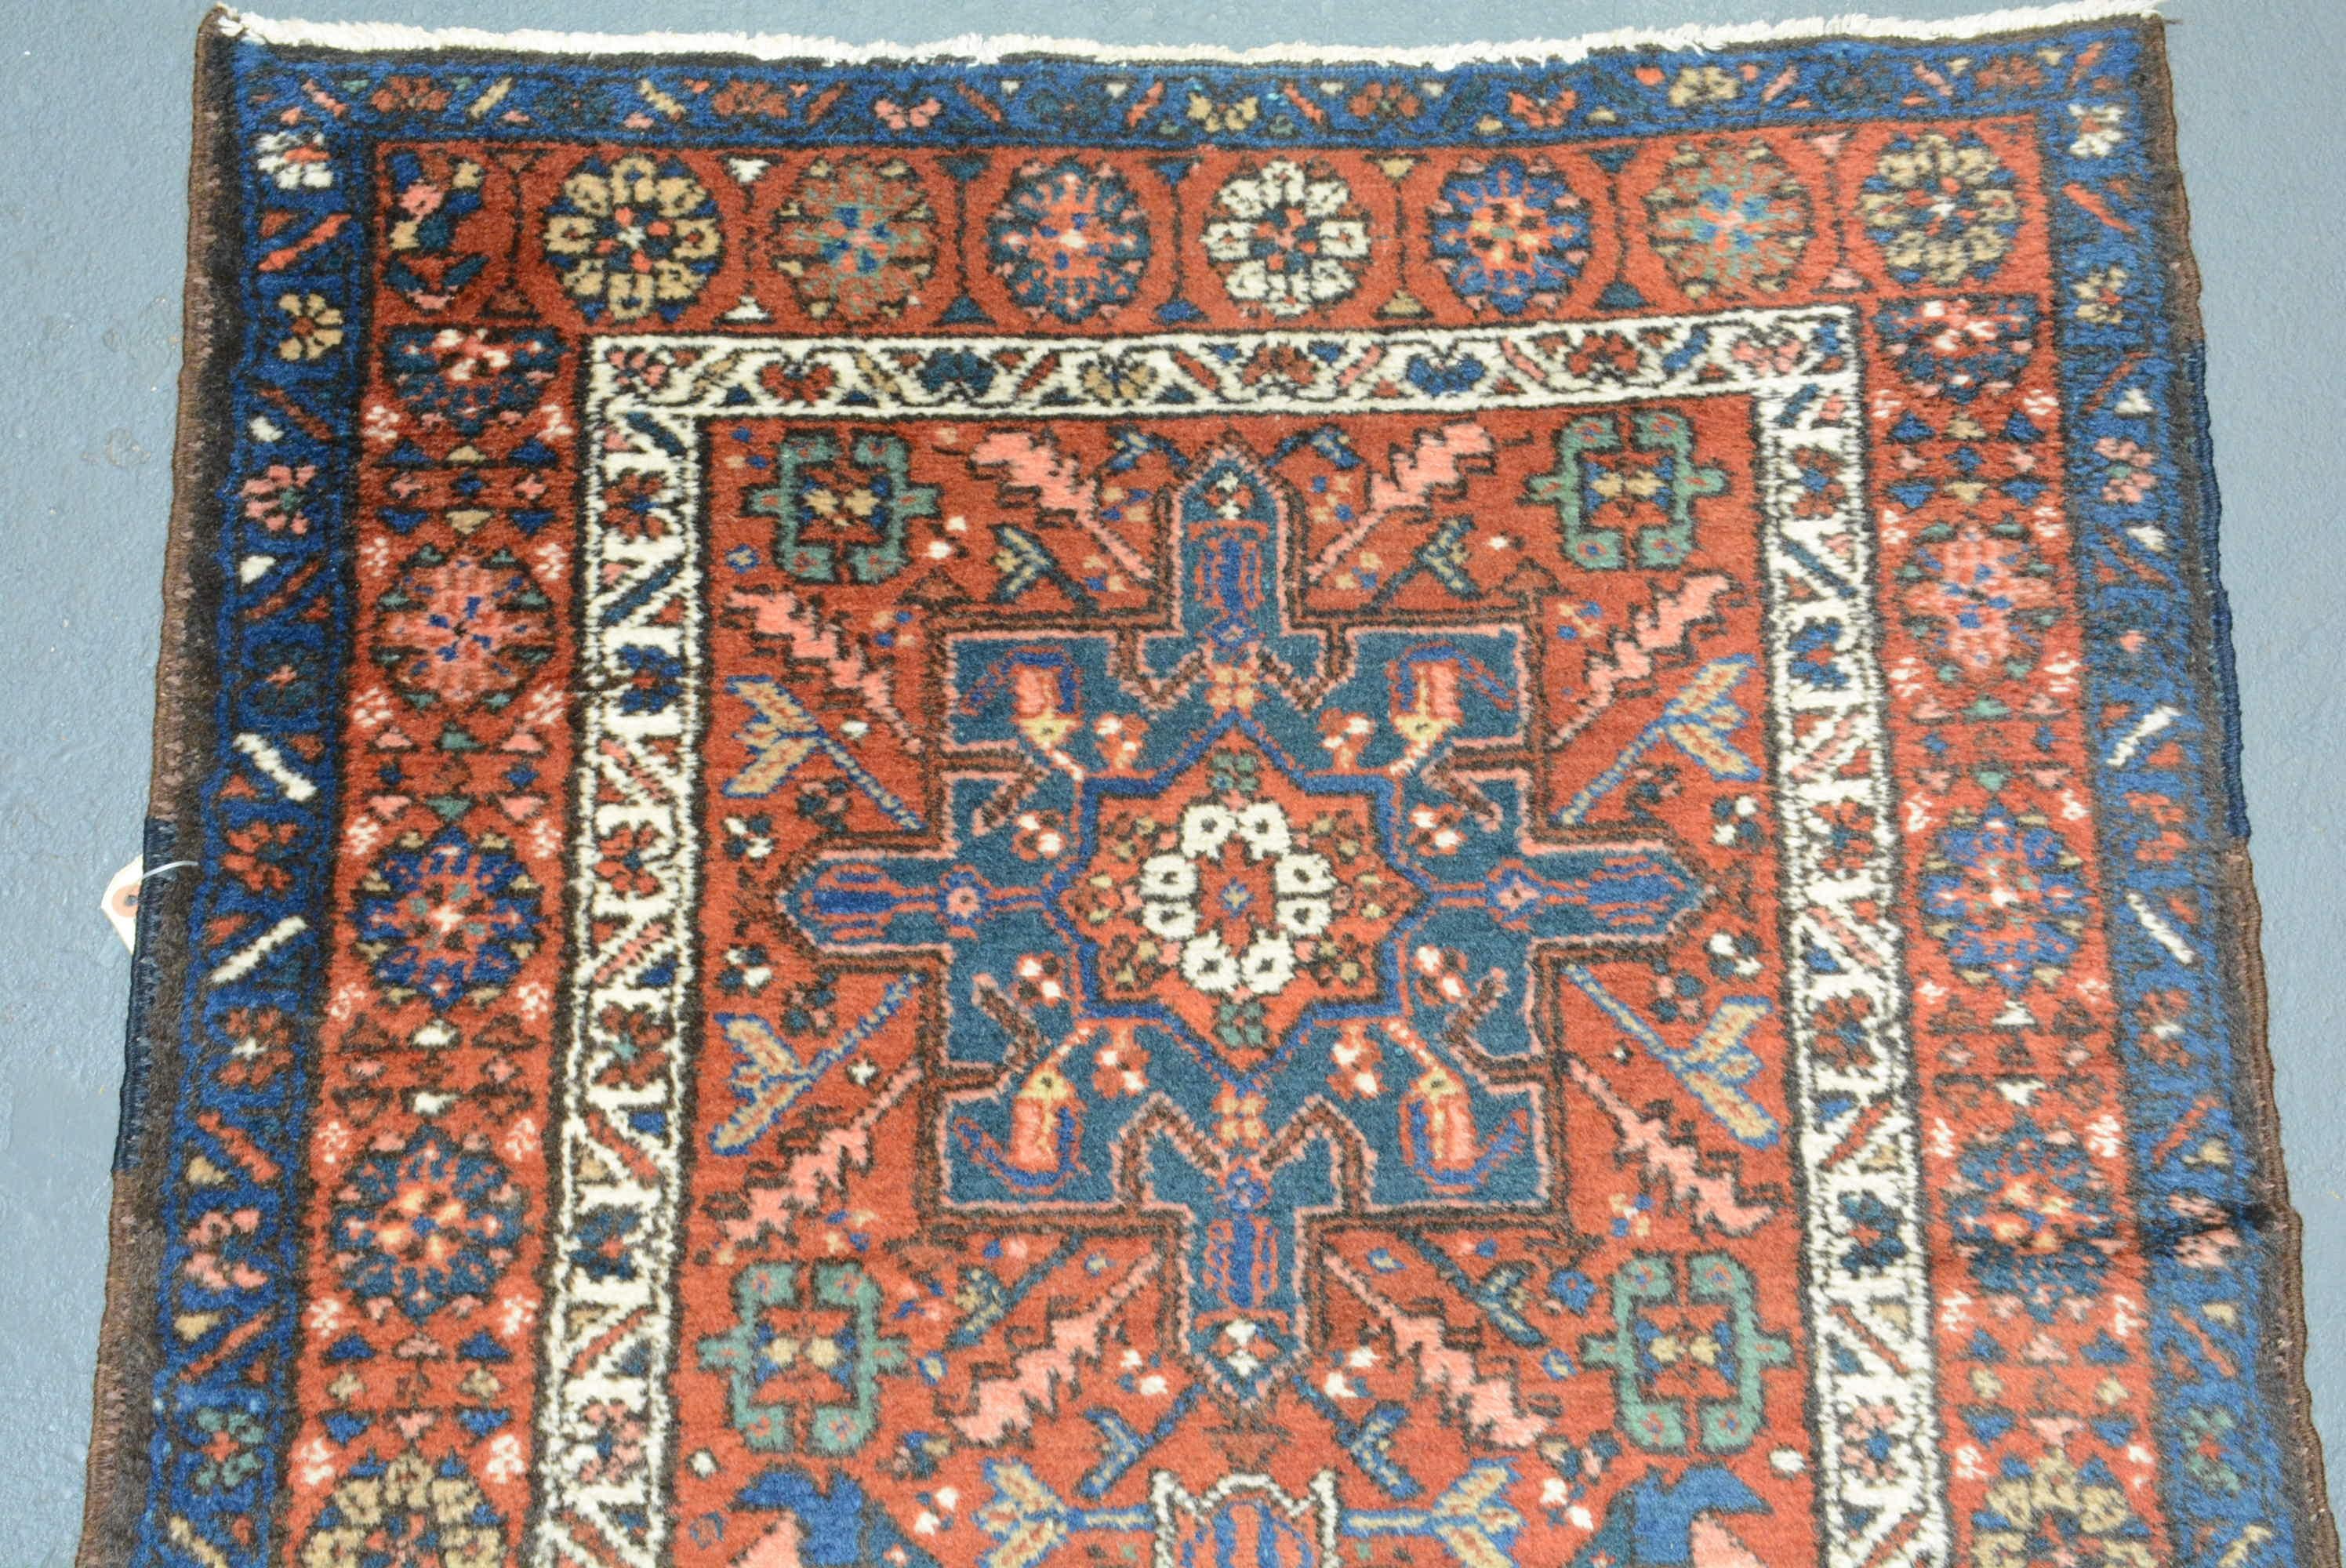 Persian Karadja rugs and runners are woven in the northwestern part of the country in a small village. These rugs are usually produced in runner formats, but room-size carpets are woven here as well. They are influenced by the designs and